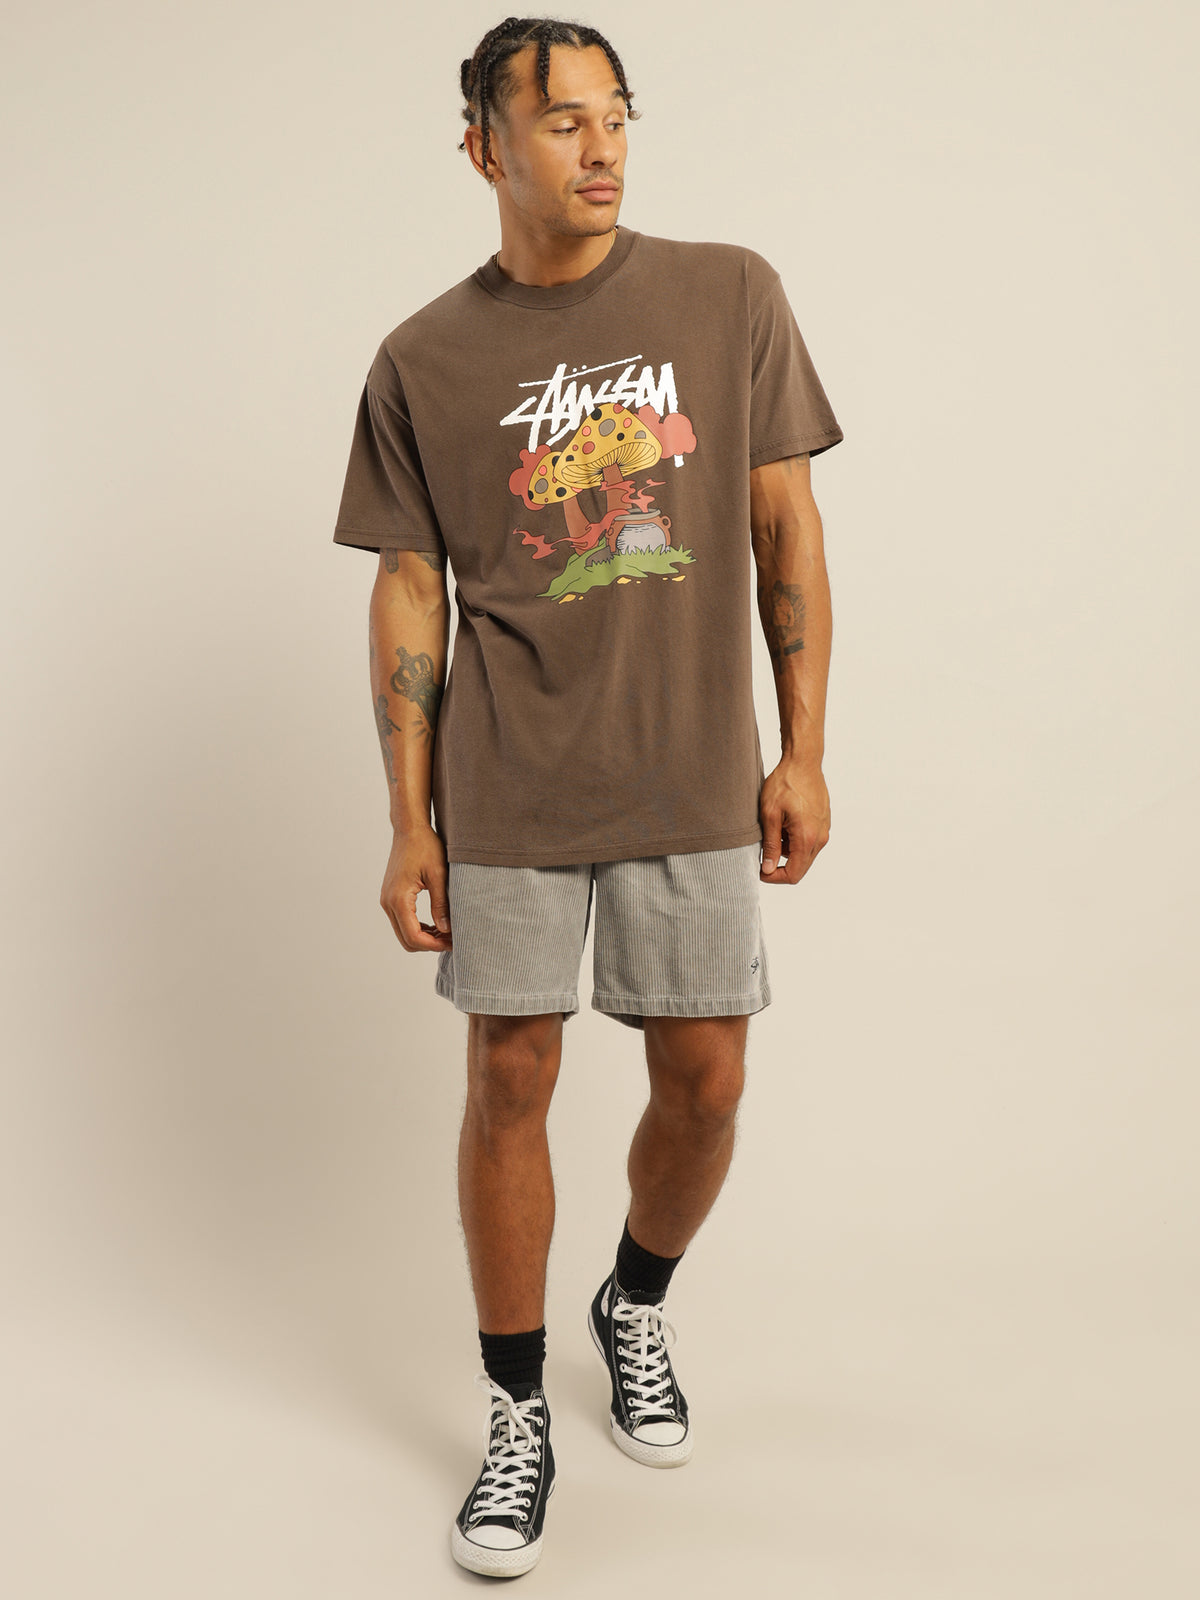 Something Cooking 50/50 T-Shirt in Pigment Brown